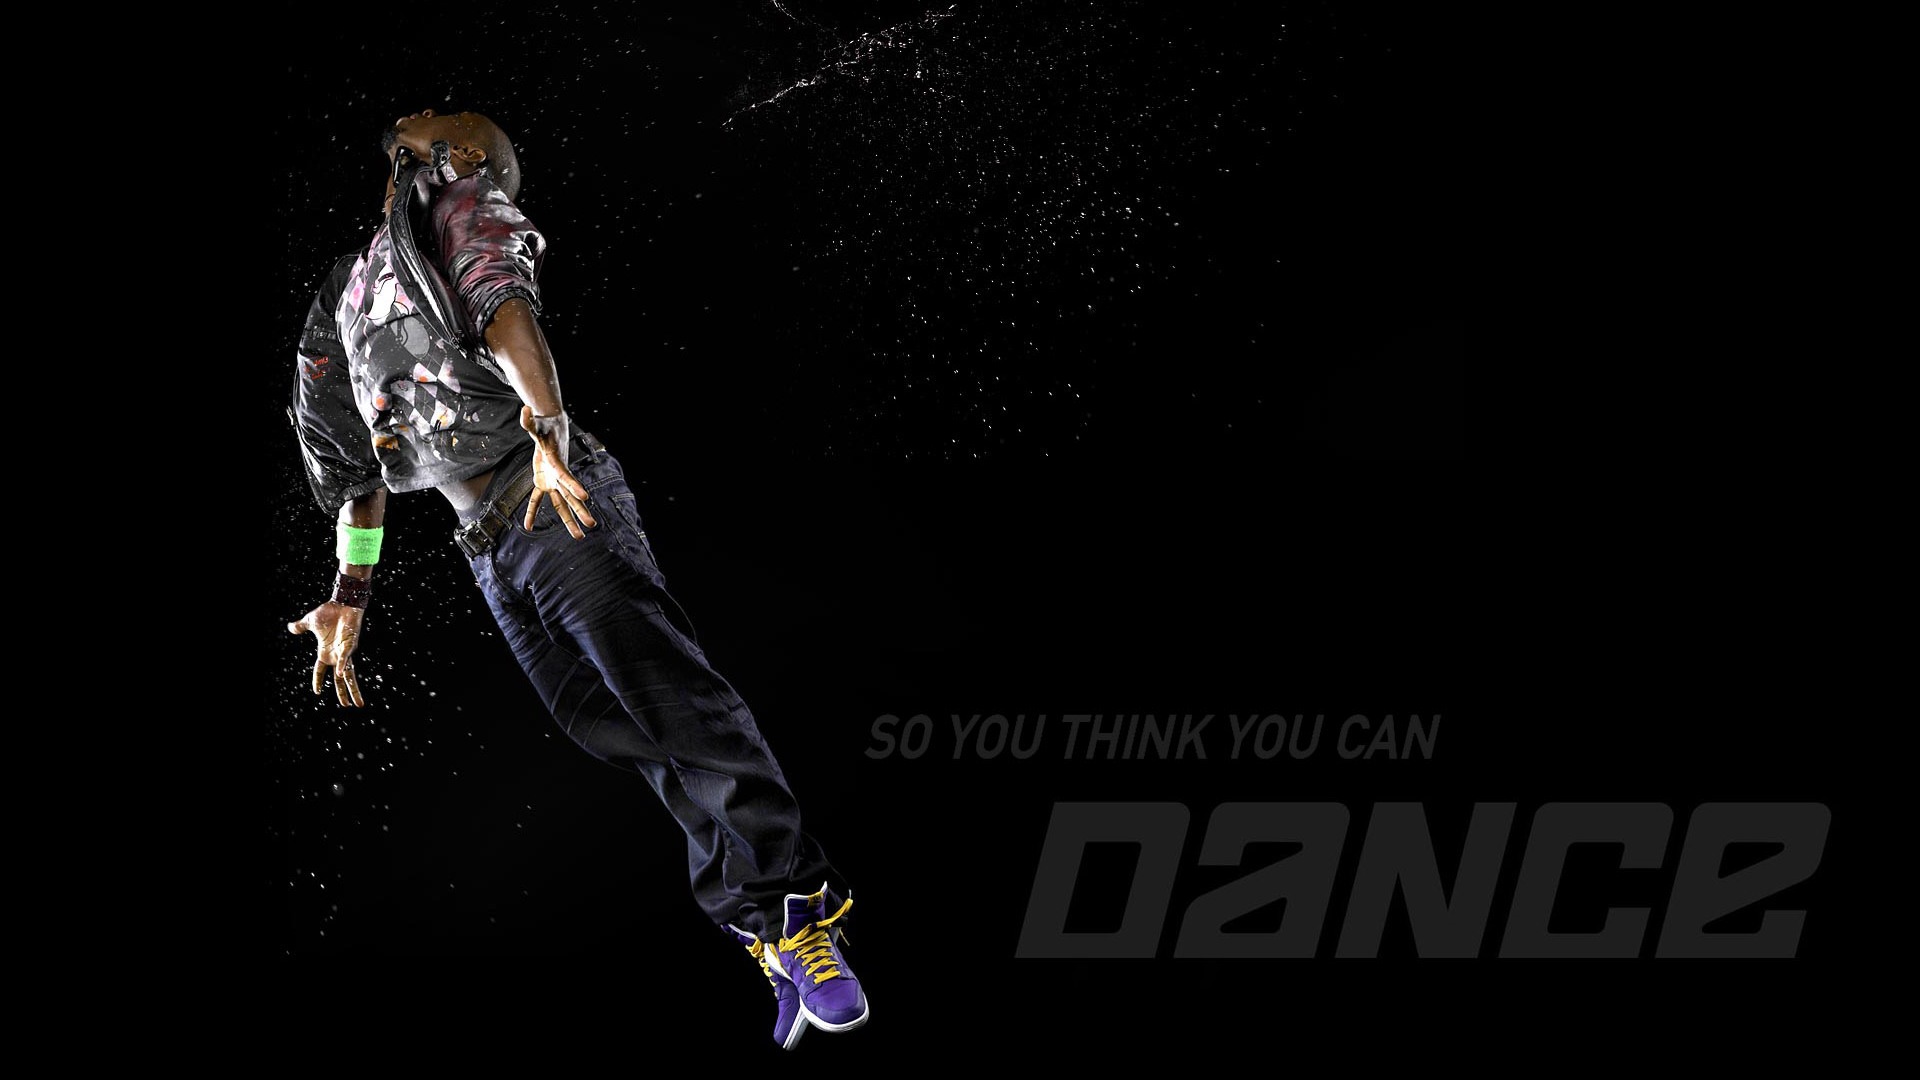 So You Think You Can Dance 舞林争霸 壁纸(一)10 - 1920x1080